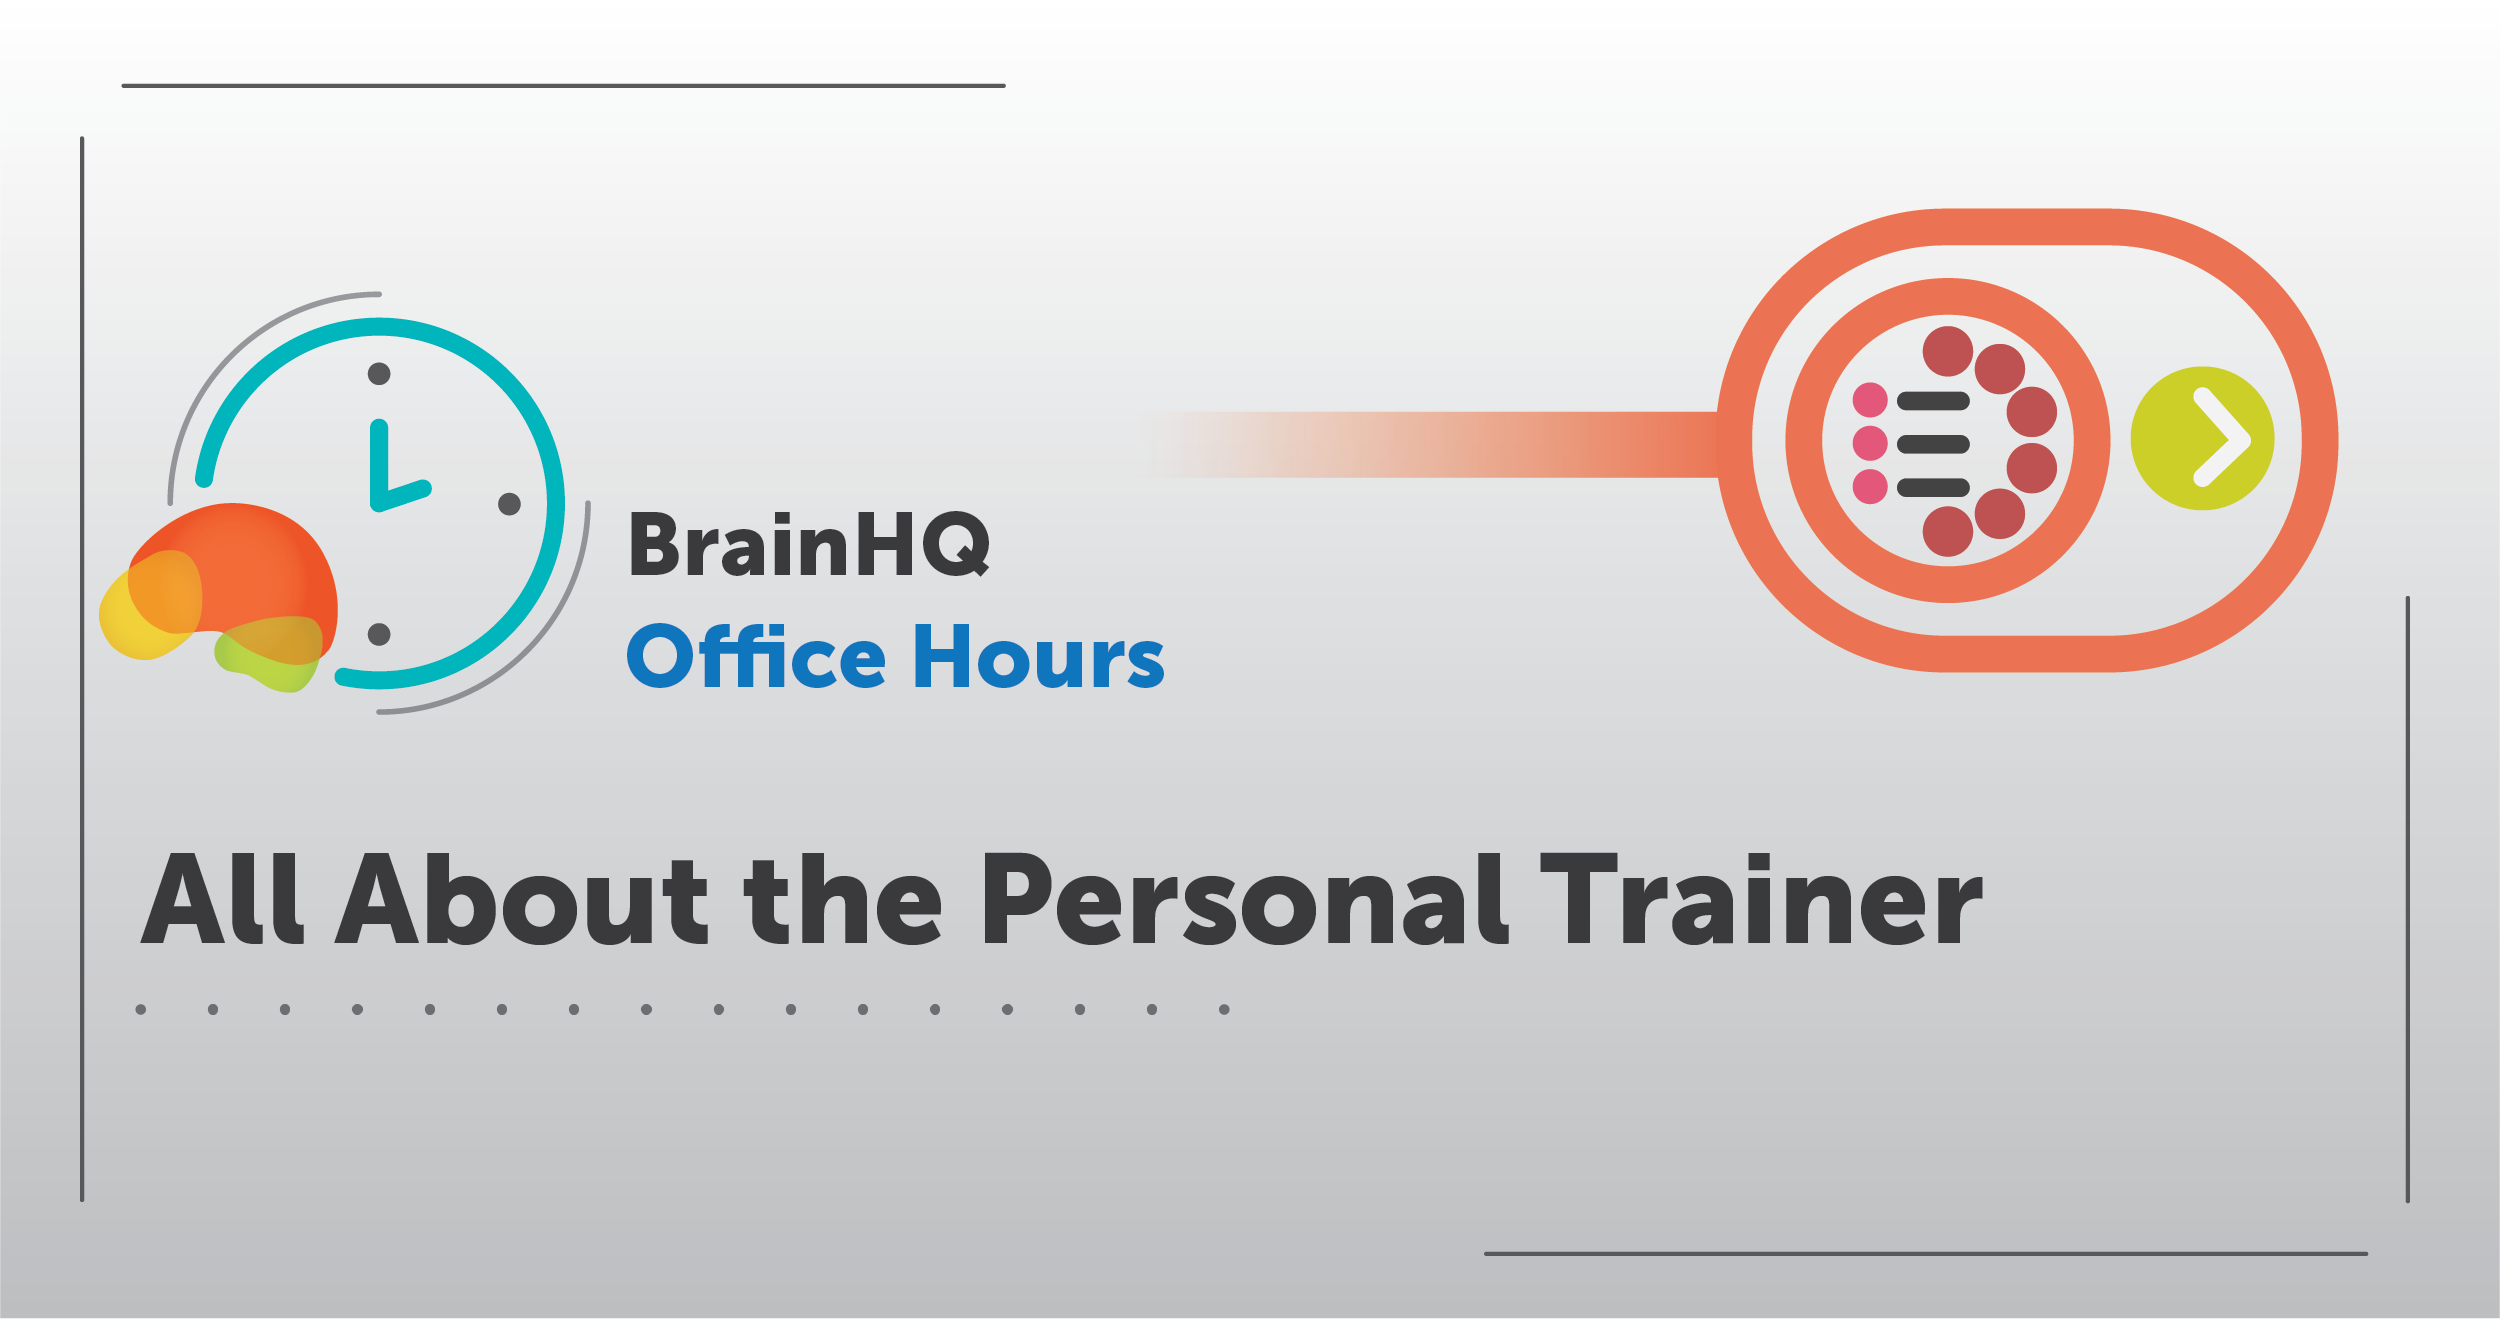 BrainHQ Office Hours: How to Use the BrainHQ Personal Trainer